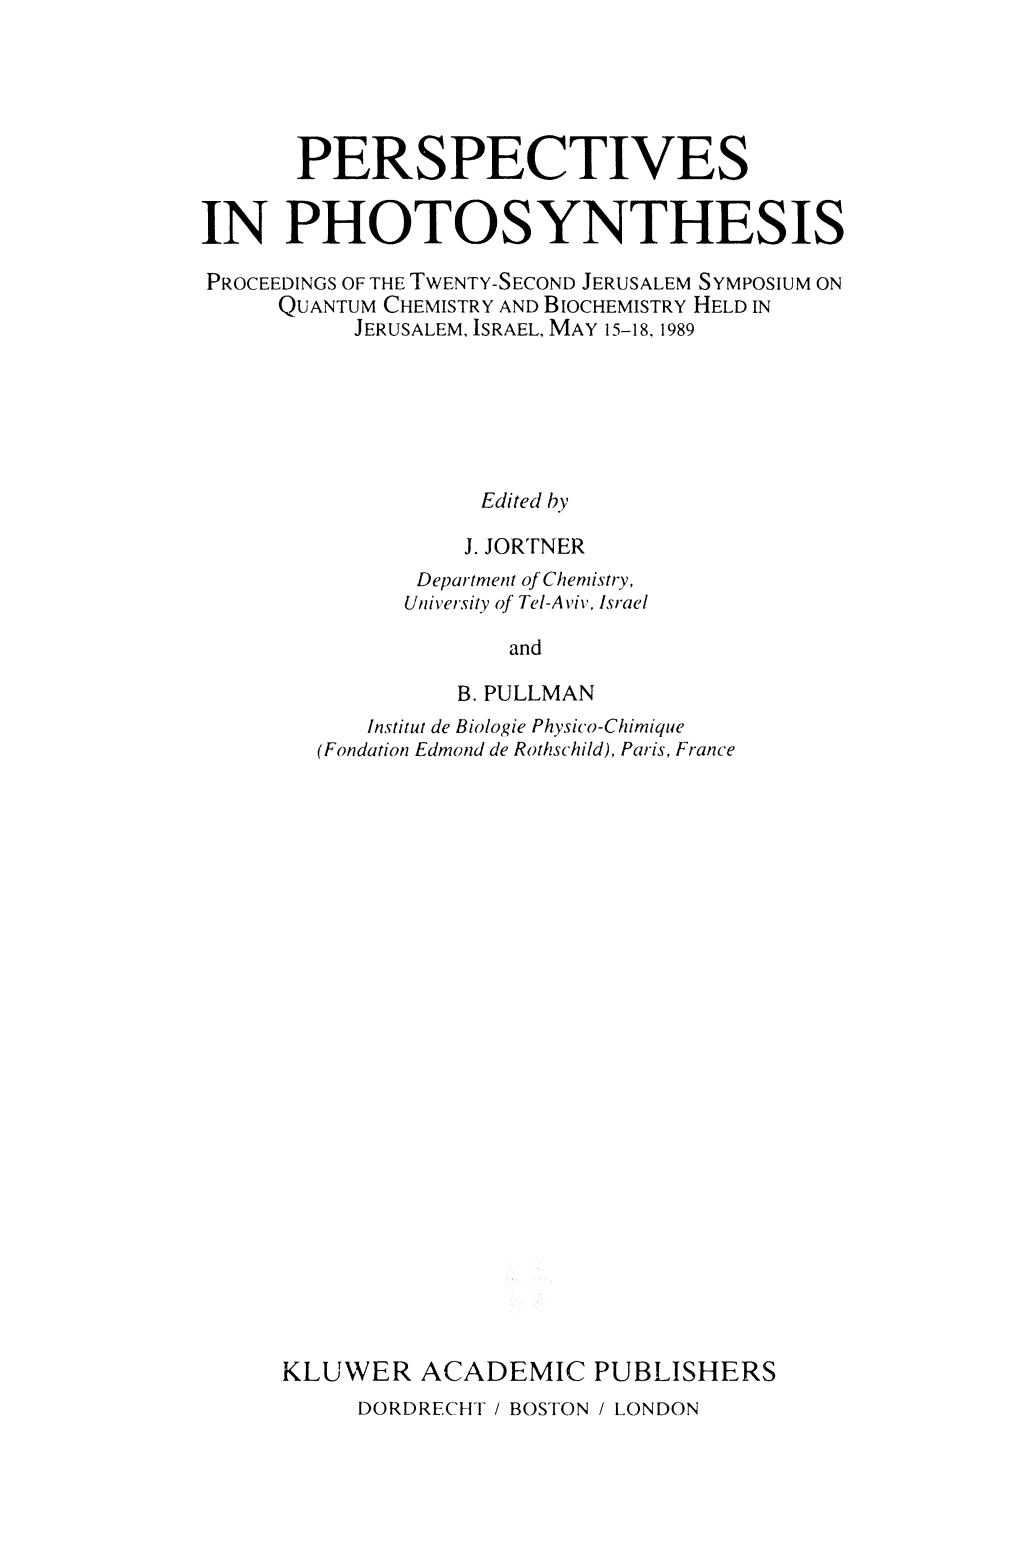 Perspectives in Photosynthesis Proceedings of the Twenty-Second Jerusalem Symposium on Quantum Chemistry and Biochemistry Held in Jerusalem, Israel, May 15-18,1989